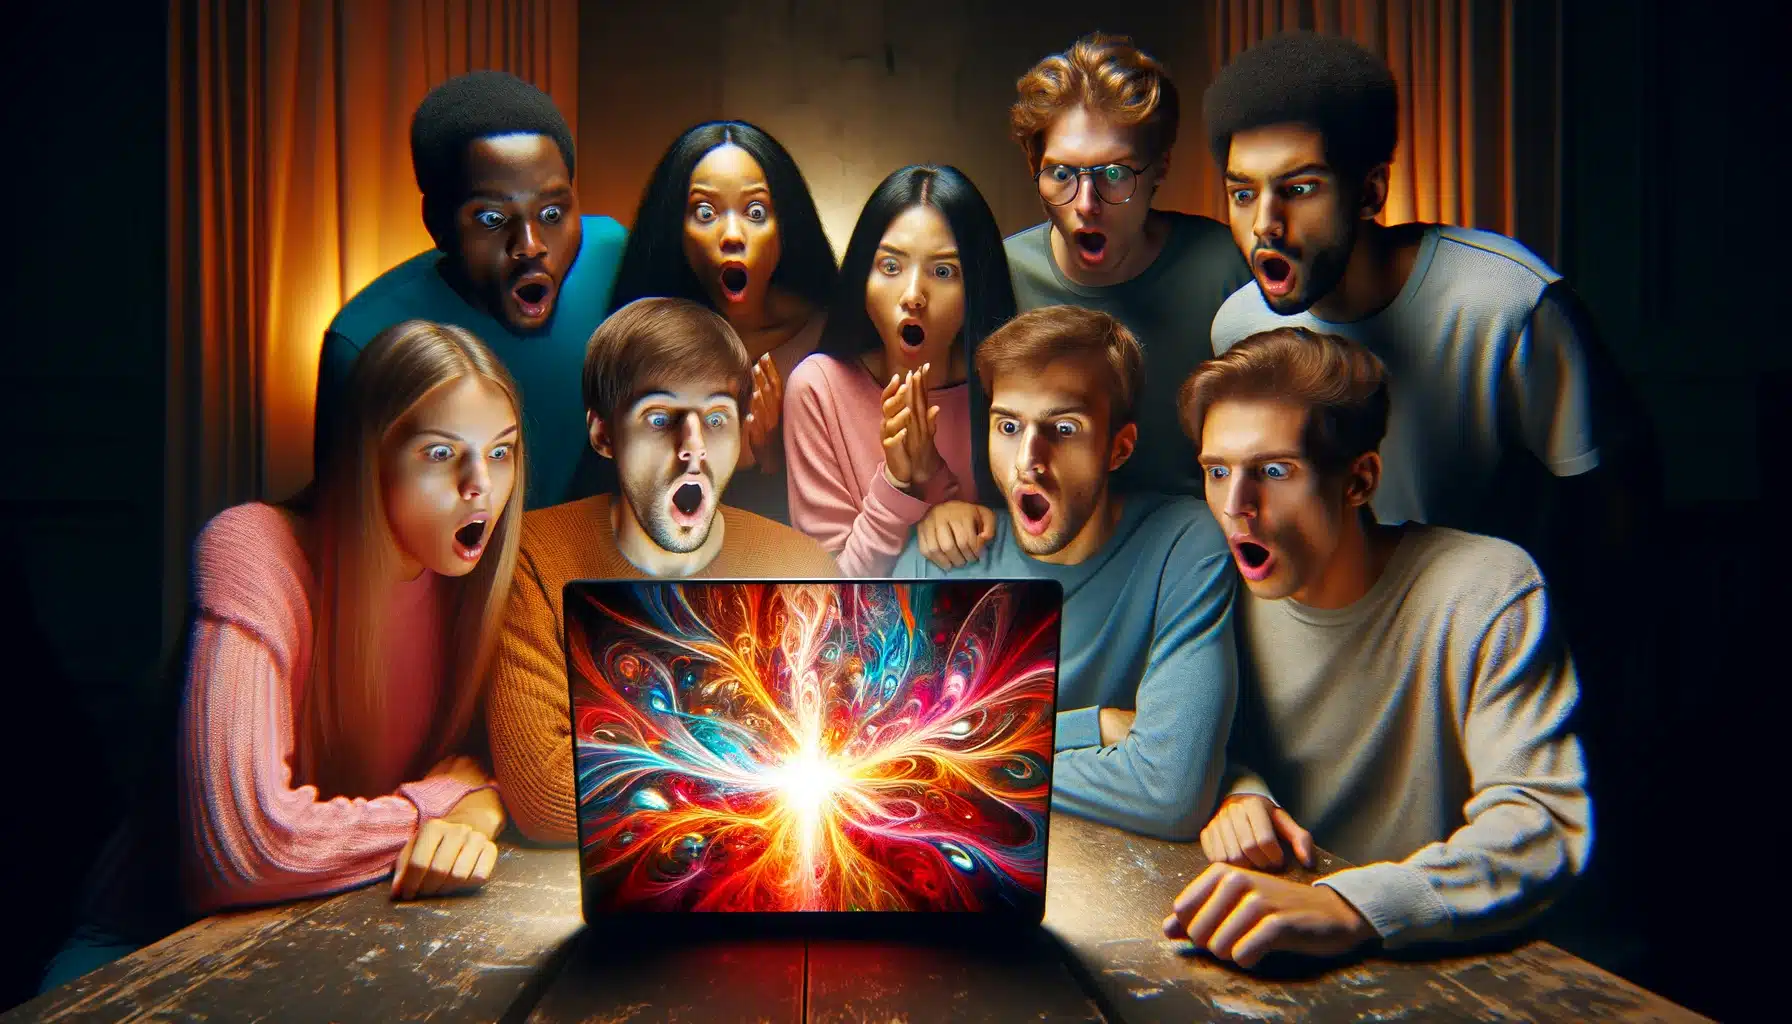 A diverse group of friends with expressions of shock and awe gather around a brightly lit laptop screen, illustrating the concept of 'Best AI Image Generators'. Their mouths are open in astonishment as they are captivated by the vibrant, abstract glow emanating from the screen, which hints at the unseen marvels produced by advanced AI technology. The room around them is dimly lit, emphasizing the intense light and colors from the laptop, and highlighting the collective amazement of the group.